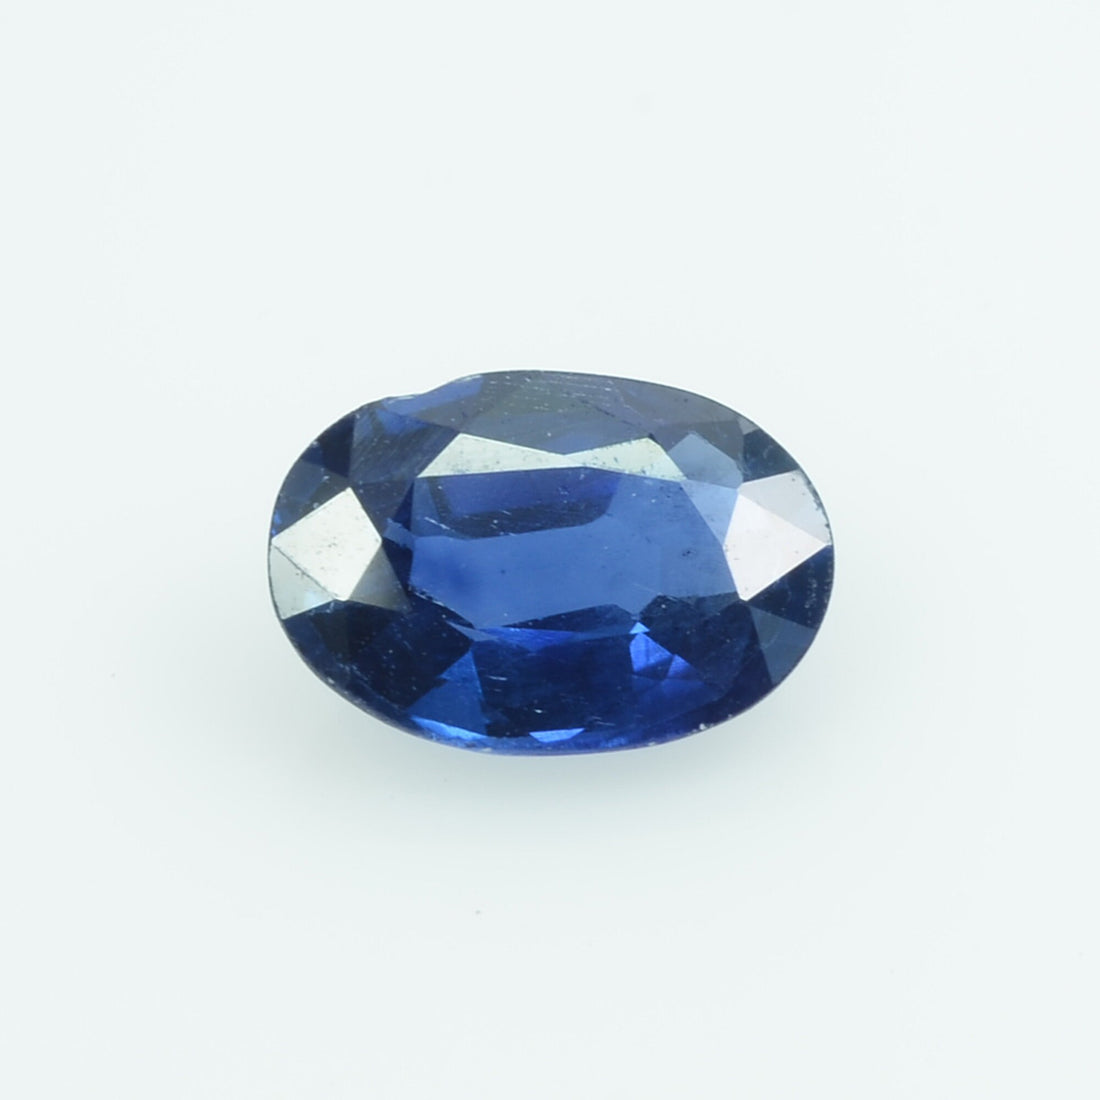 1.16 Cts Natural Blue sapphire loose gemstone oval cut